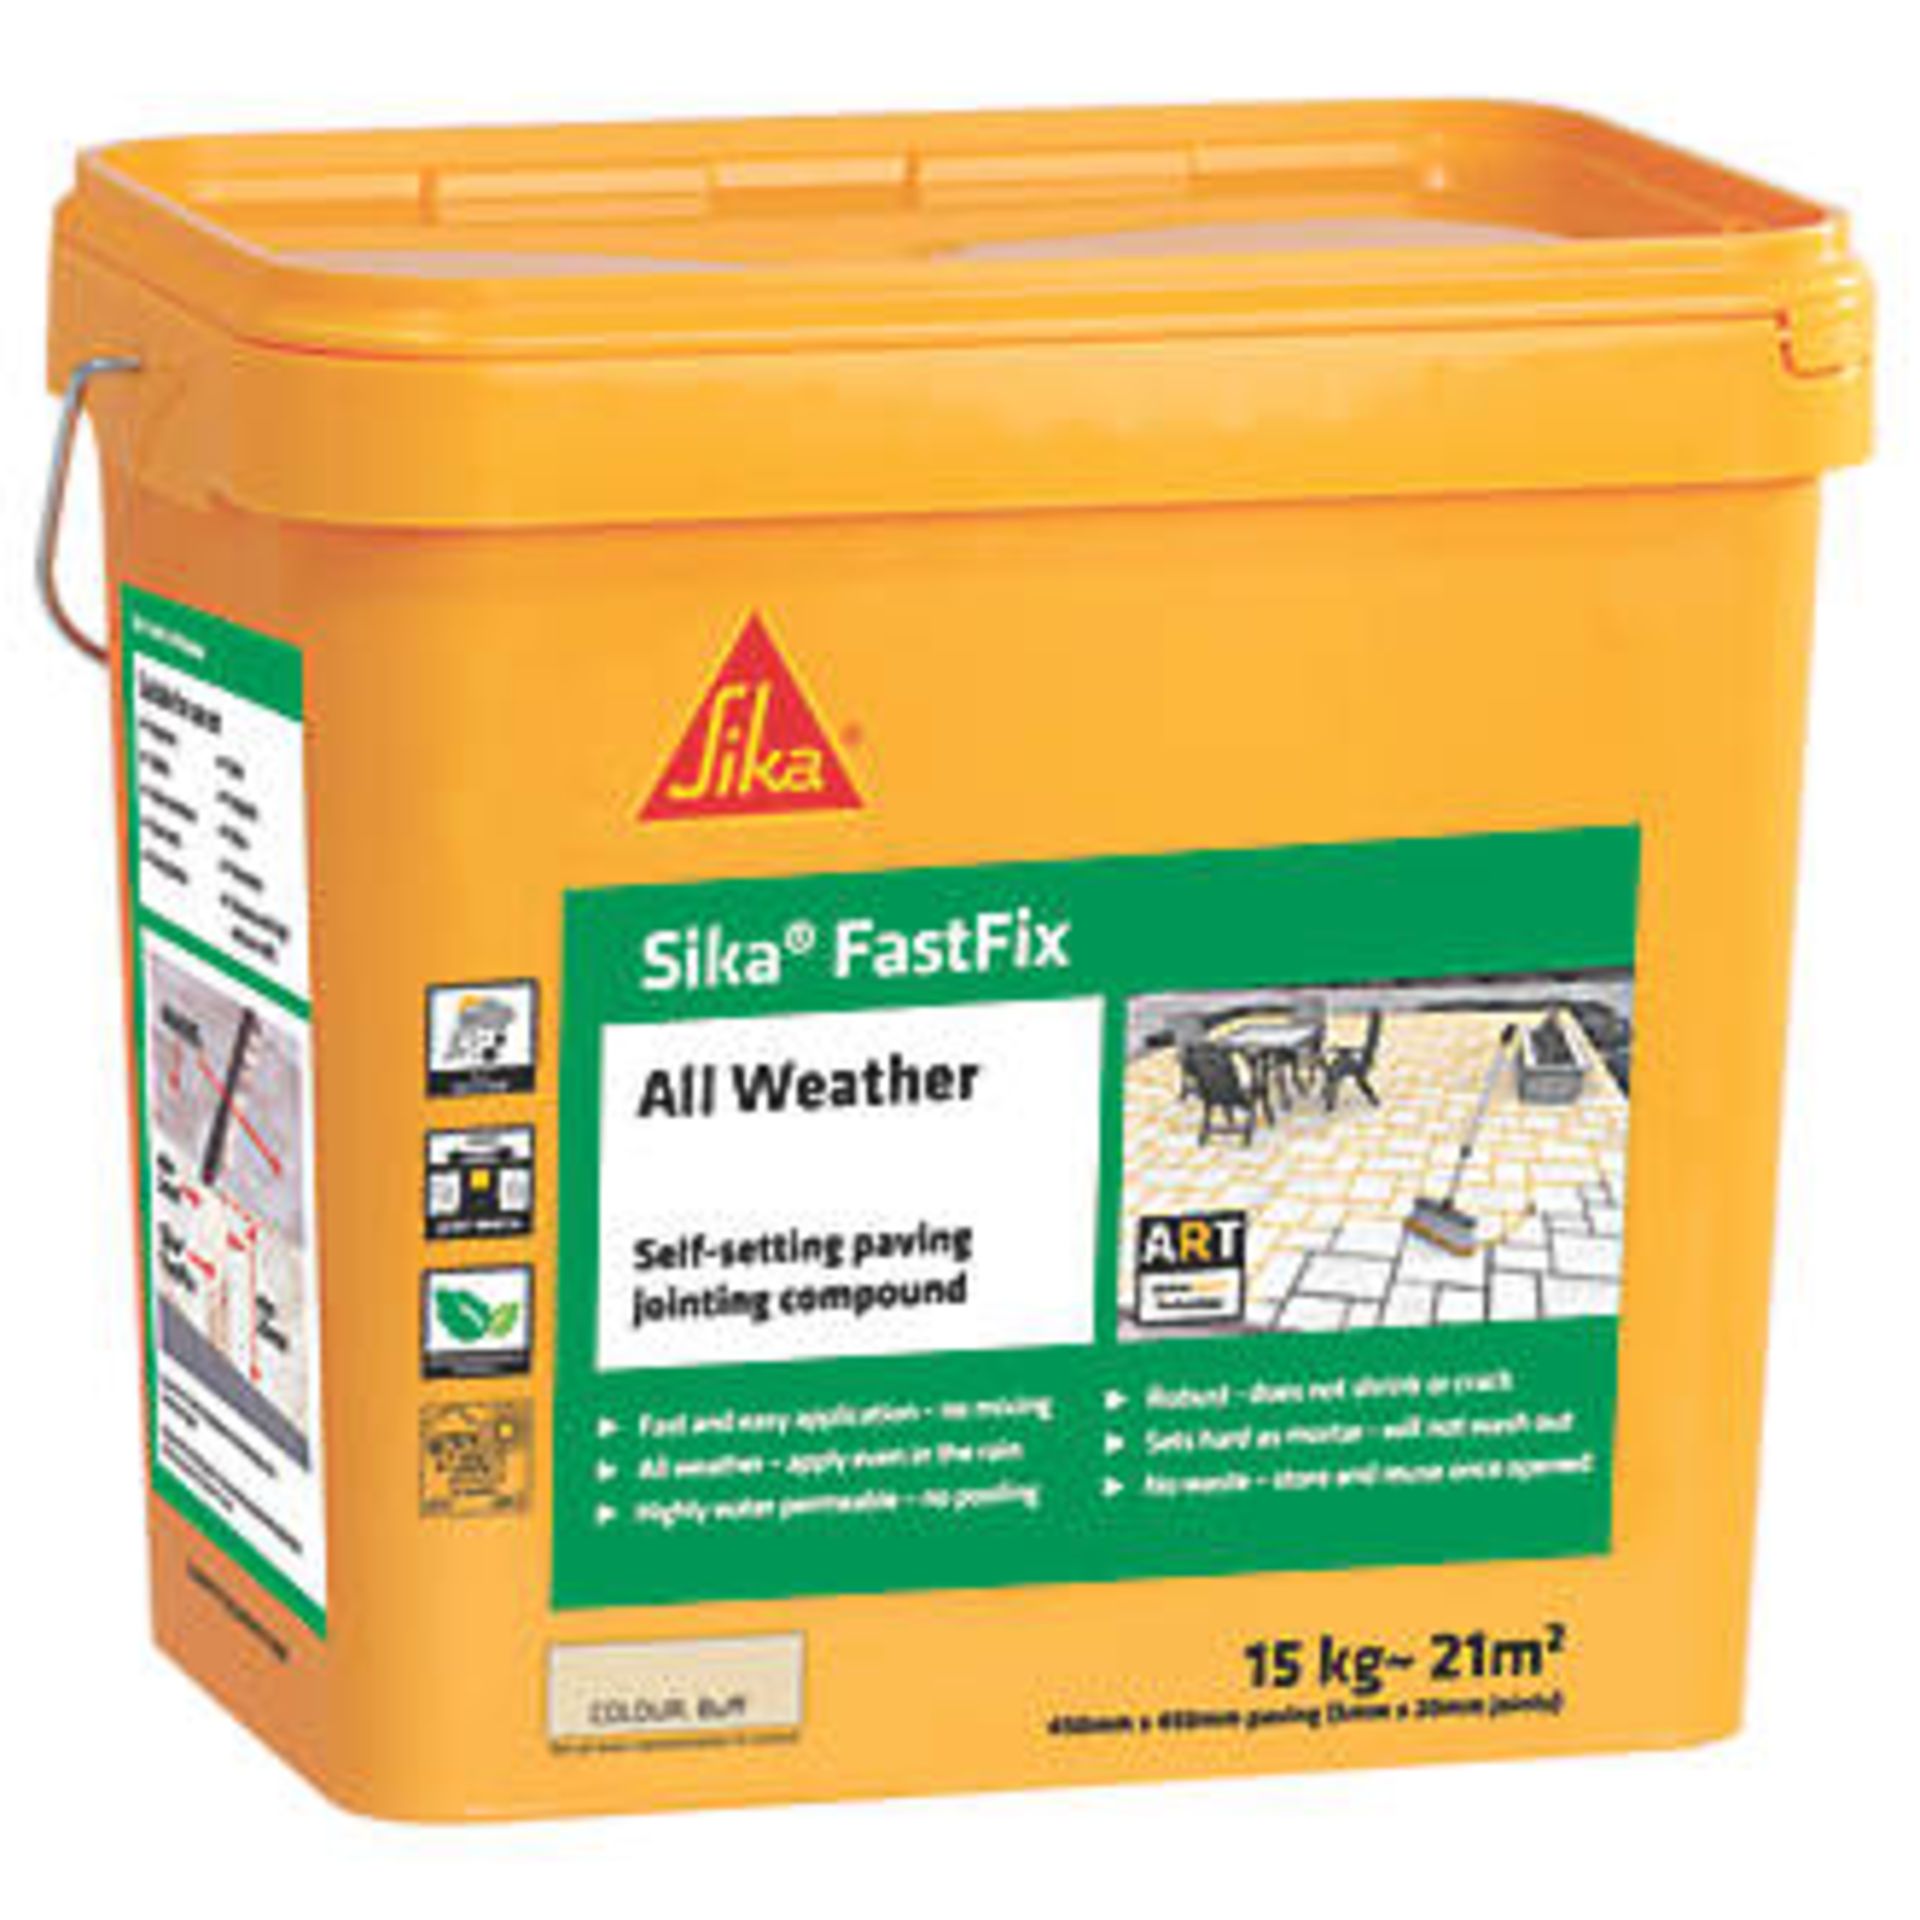 2 x 14 kg Sika Fast Fix All Weather Self Setting Jointing Compound BUFF